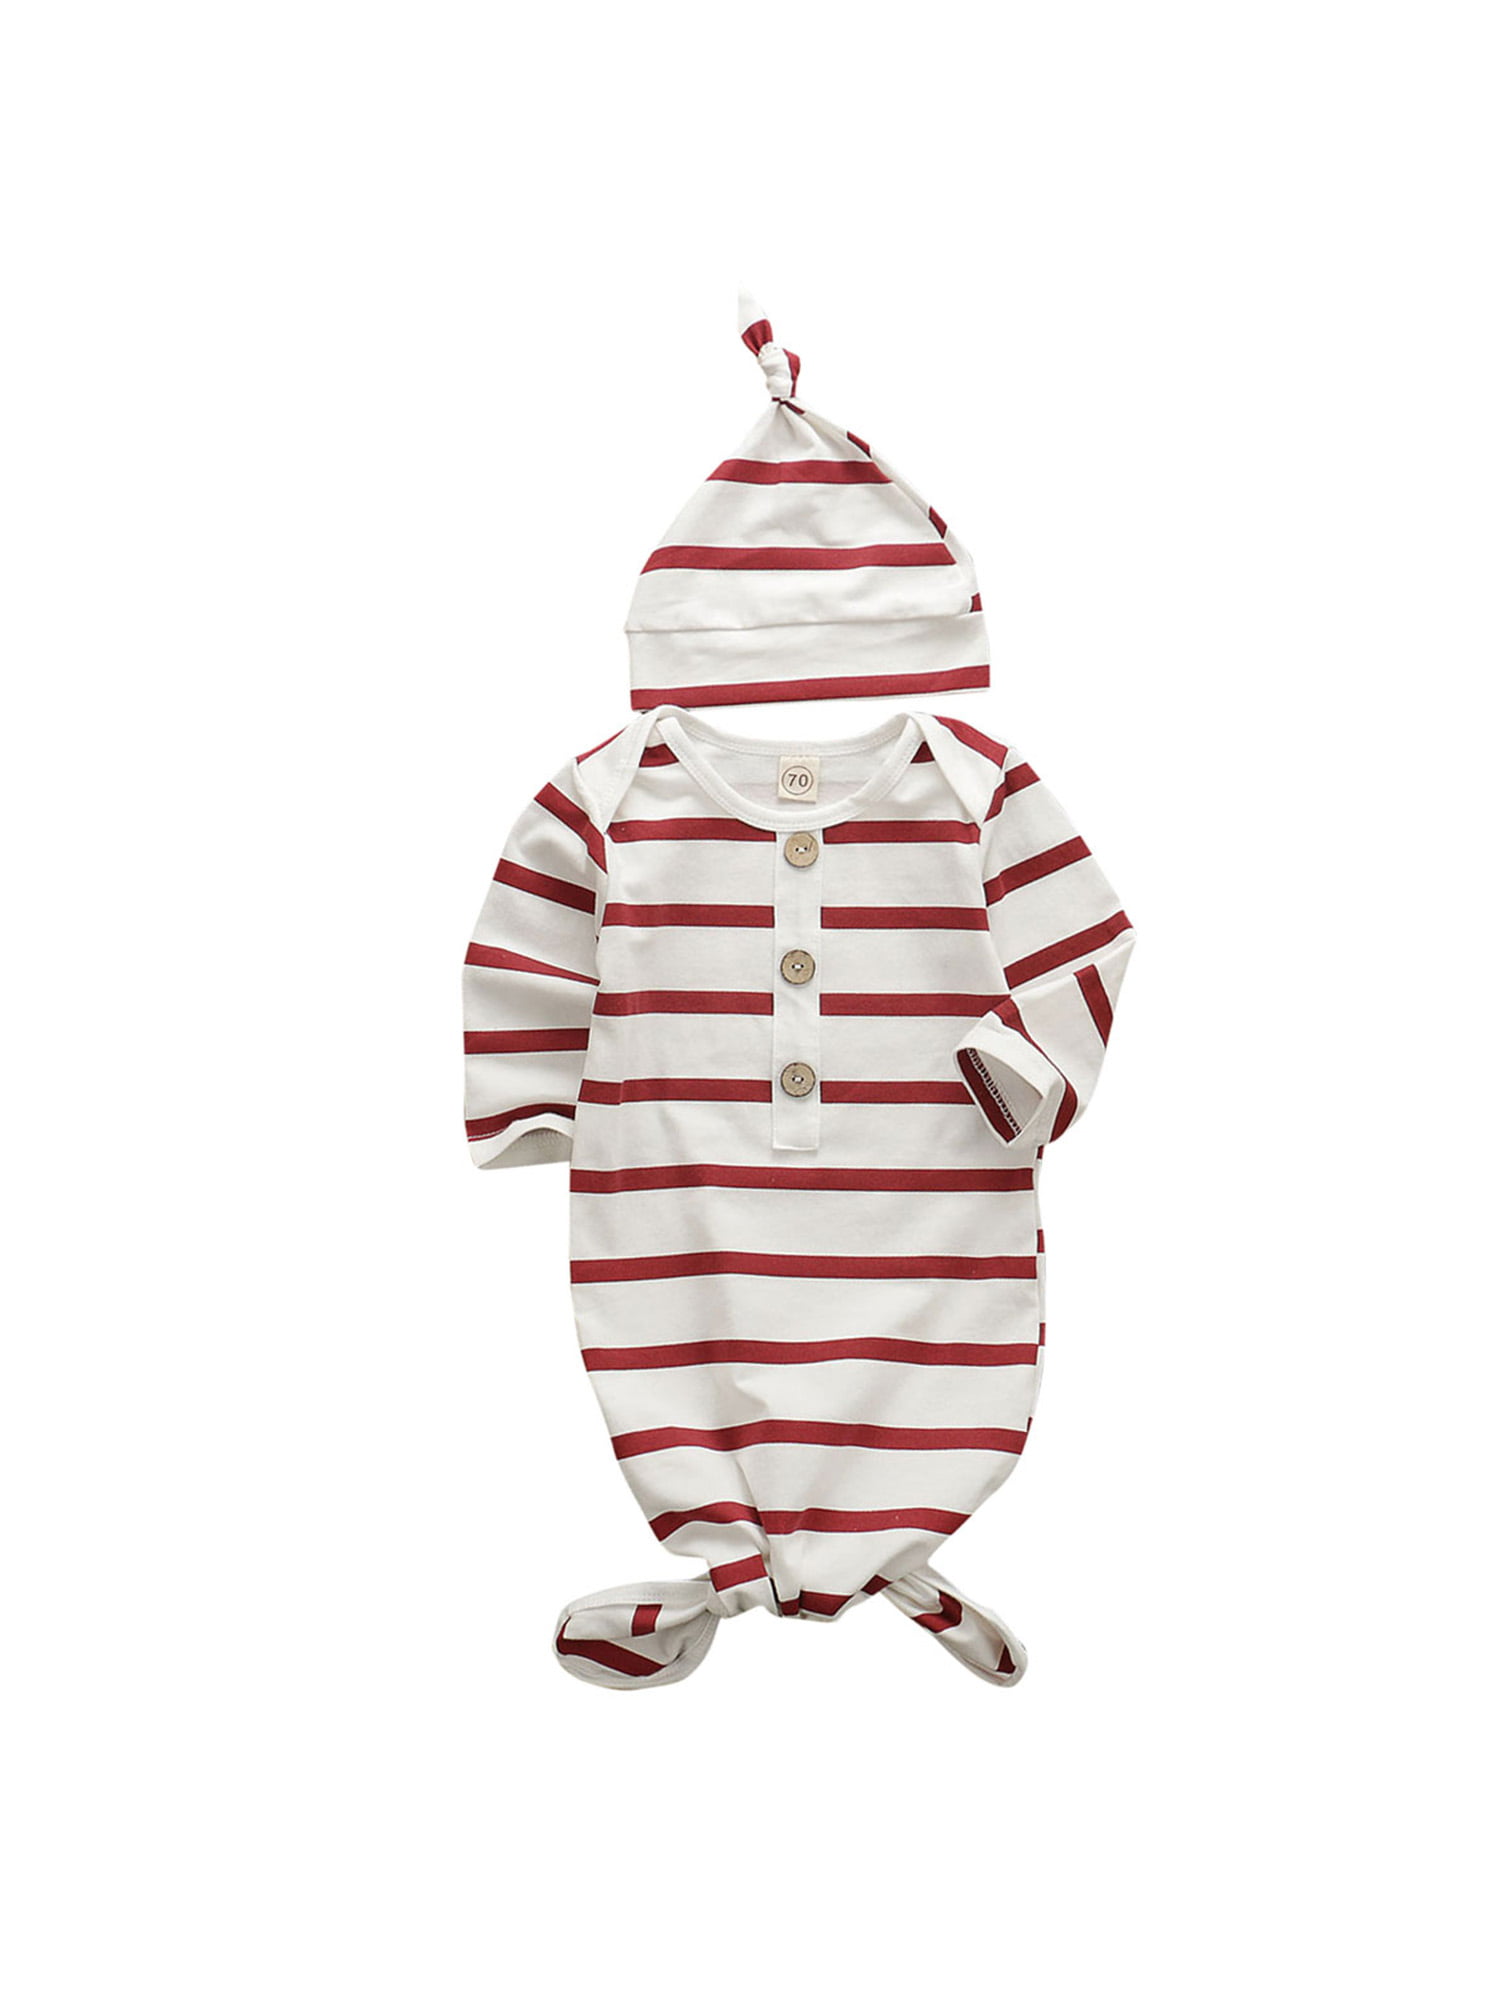 Baby Gown Newborn Cotton Nightgown Long Sleeve Stripe Baby Sleeping Bags Baby Boy Girl Coming Home Outfits Set 